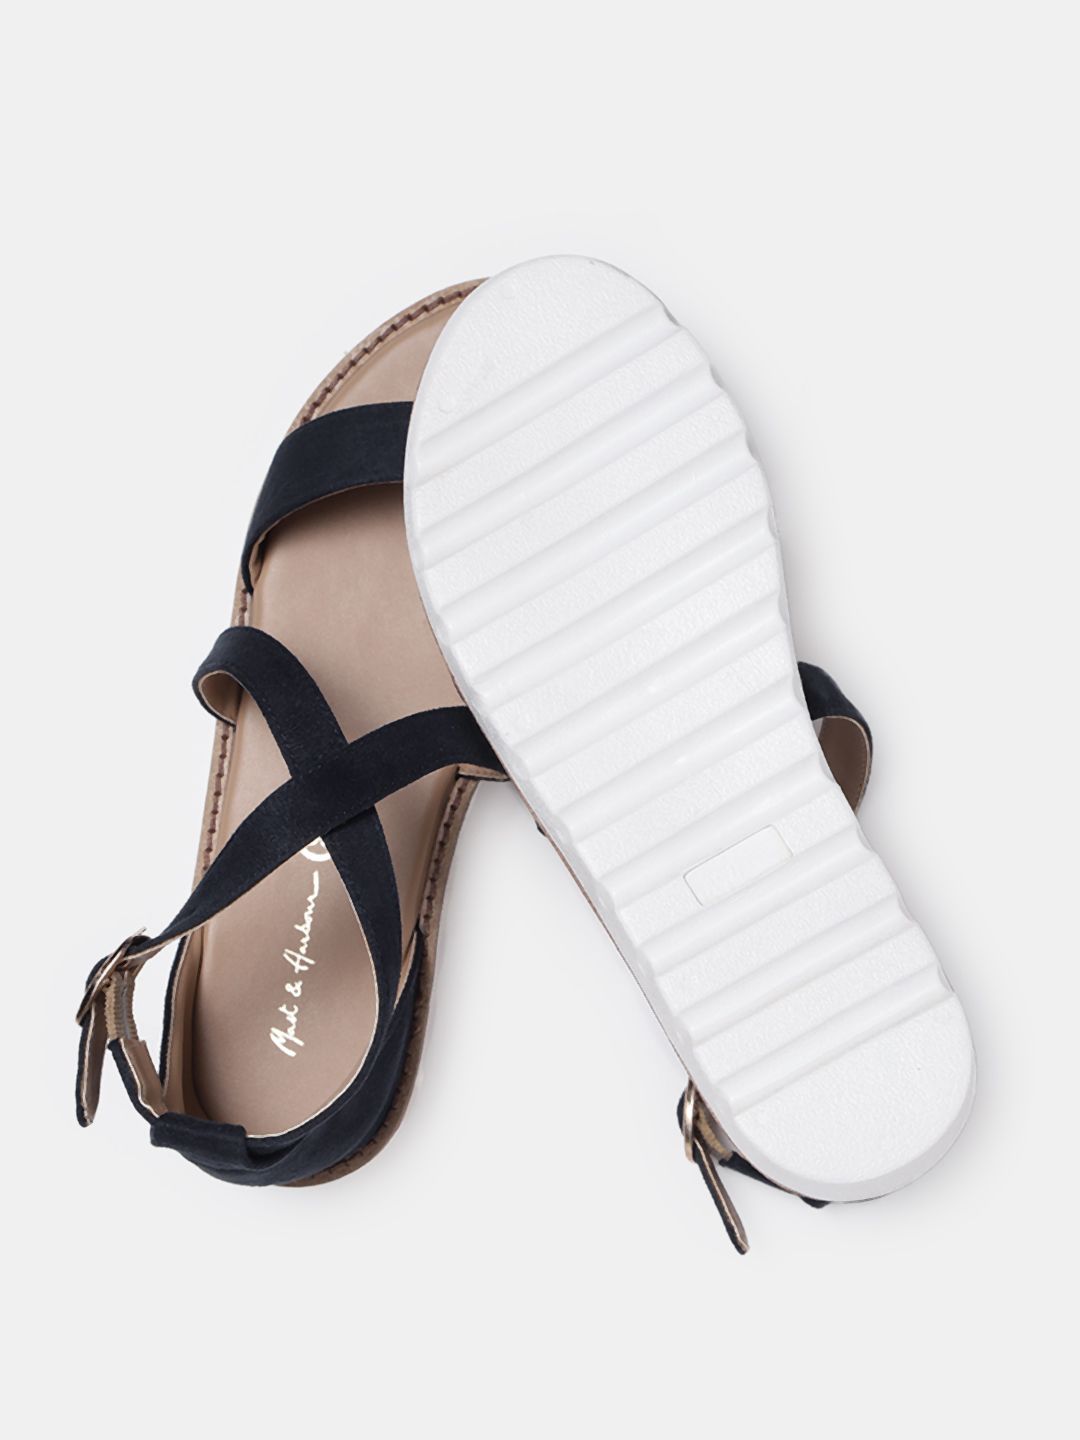 mast and harbour open toe flats